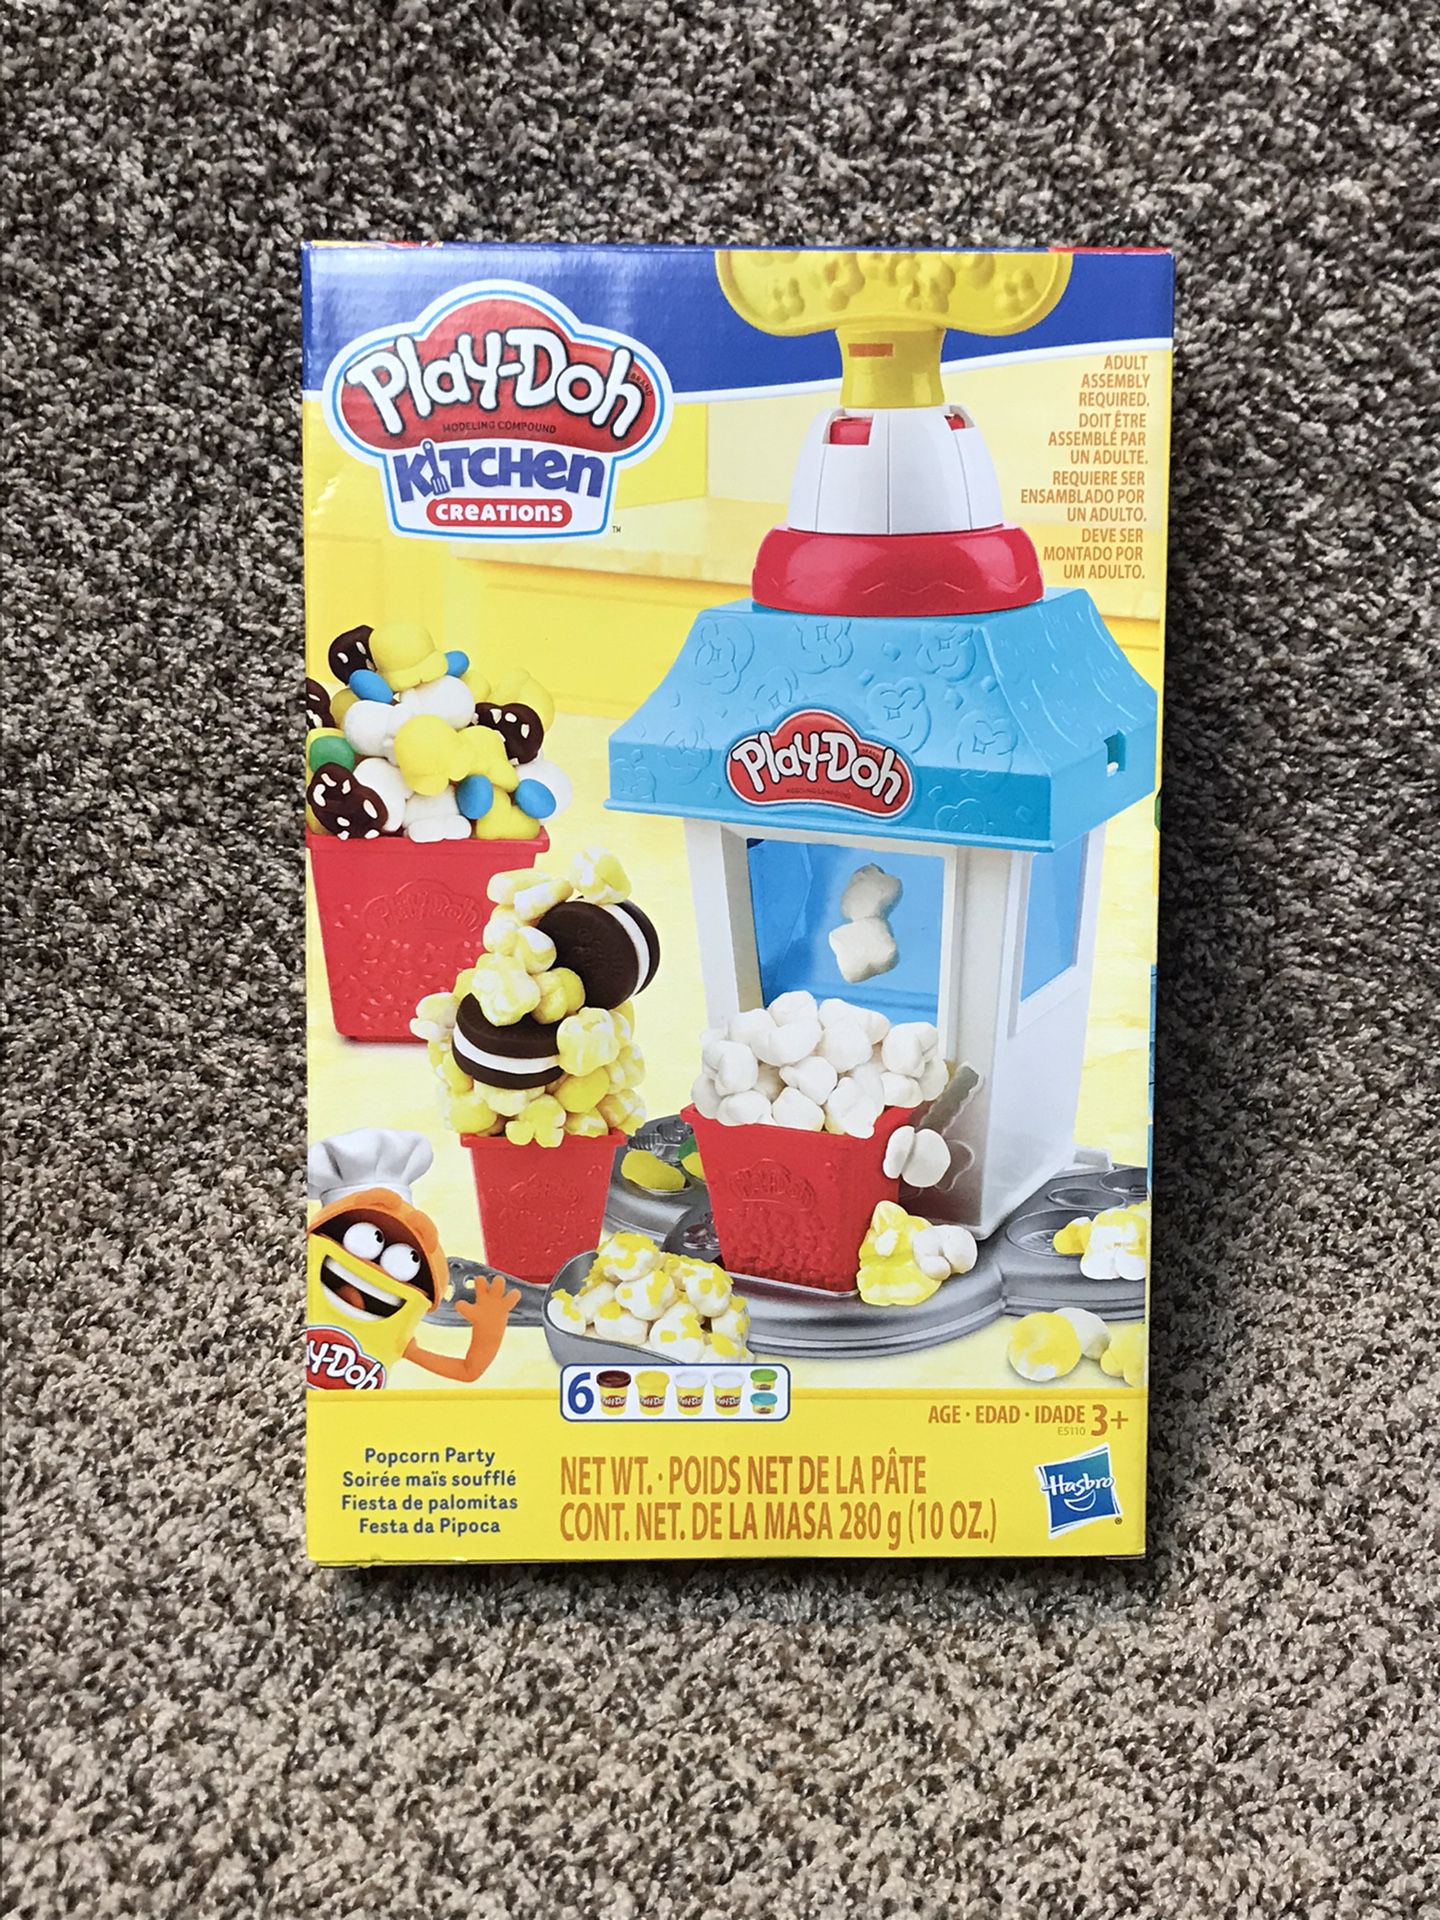 Play-Doh Kitchen Creations Popcorn Party Play Food Set, 6 Cans (10 oz)